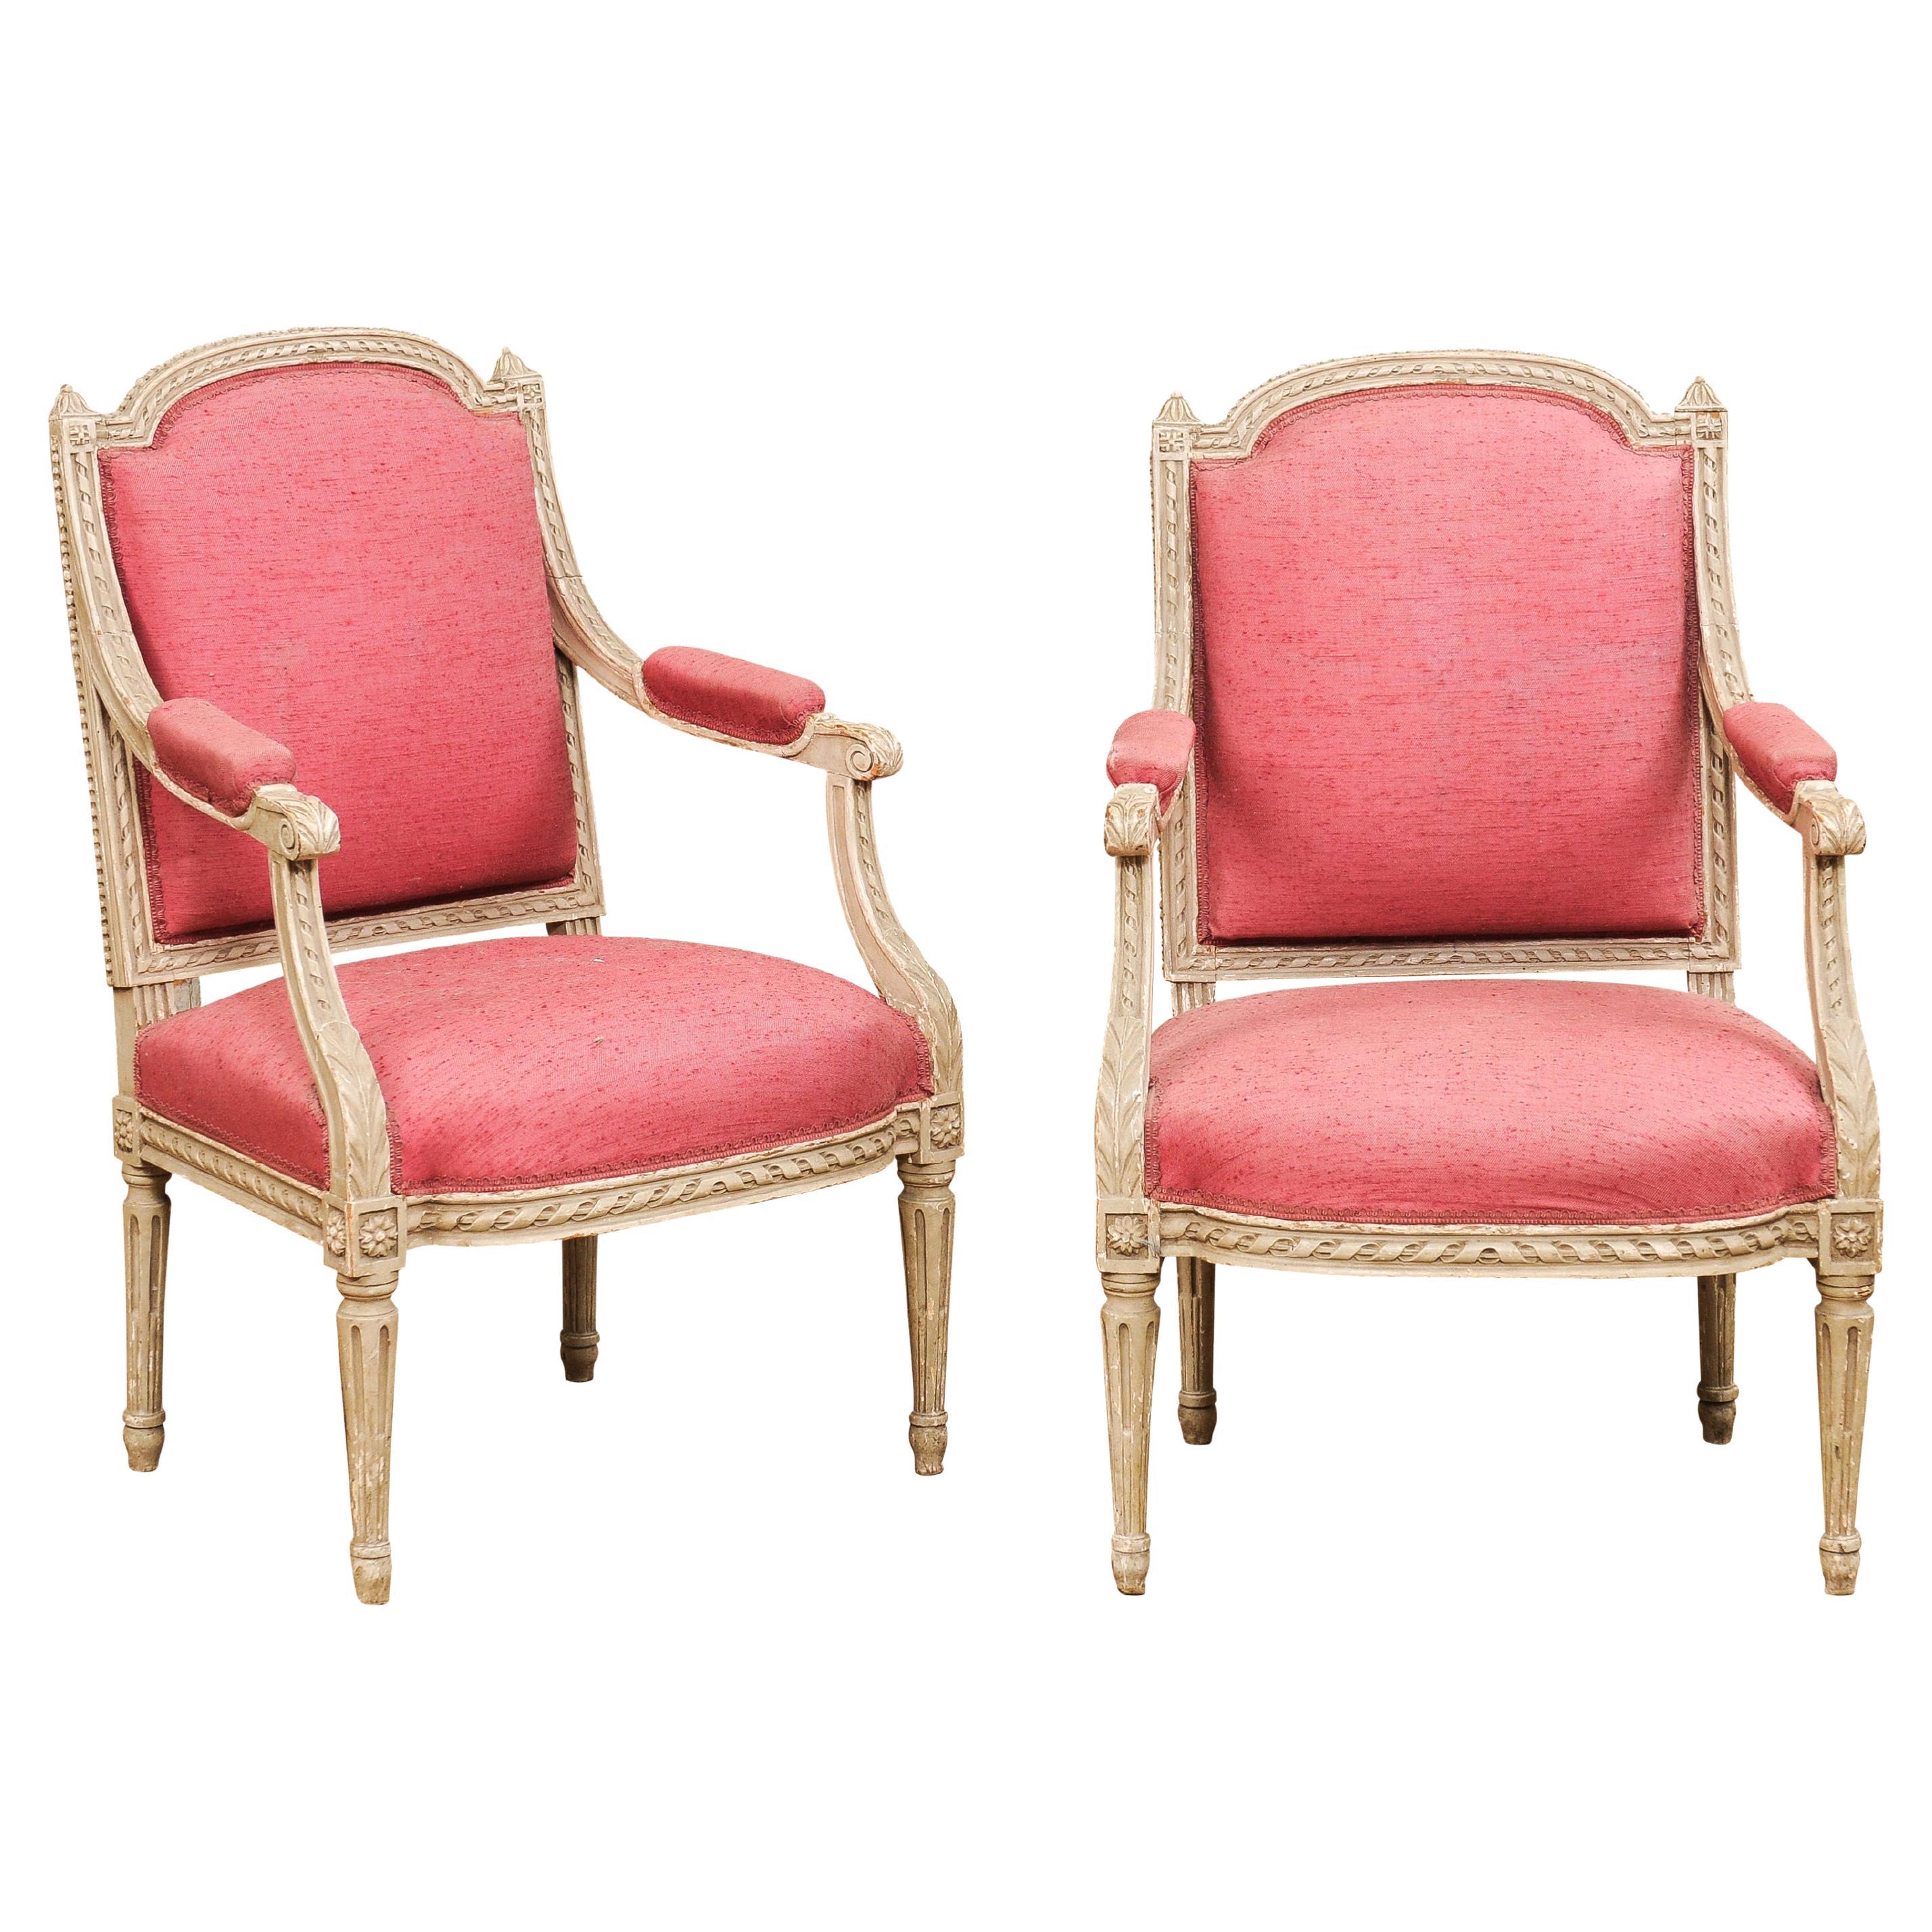 Two French Louis XVI Style Painted Armchairs with Richly Carved Décor, Sold Each